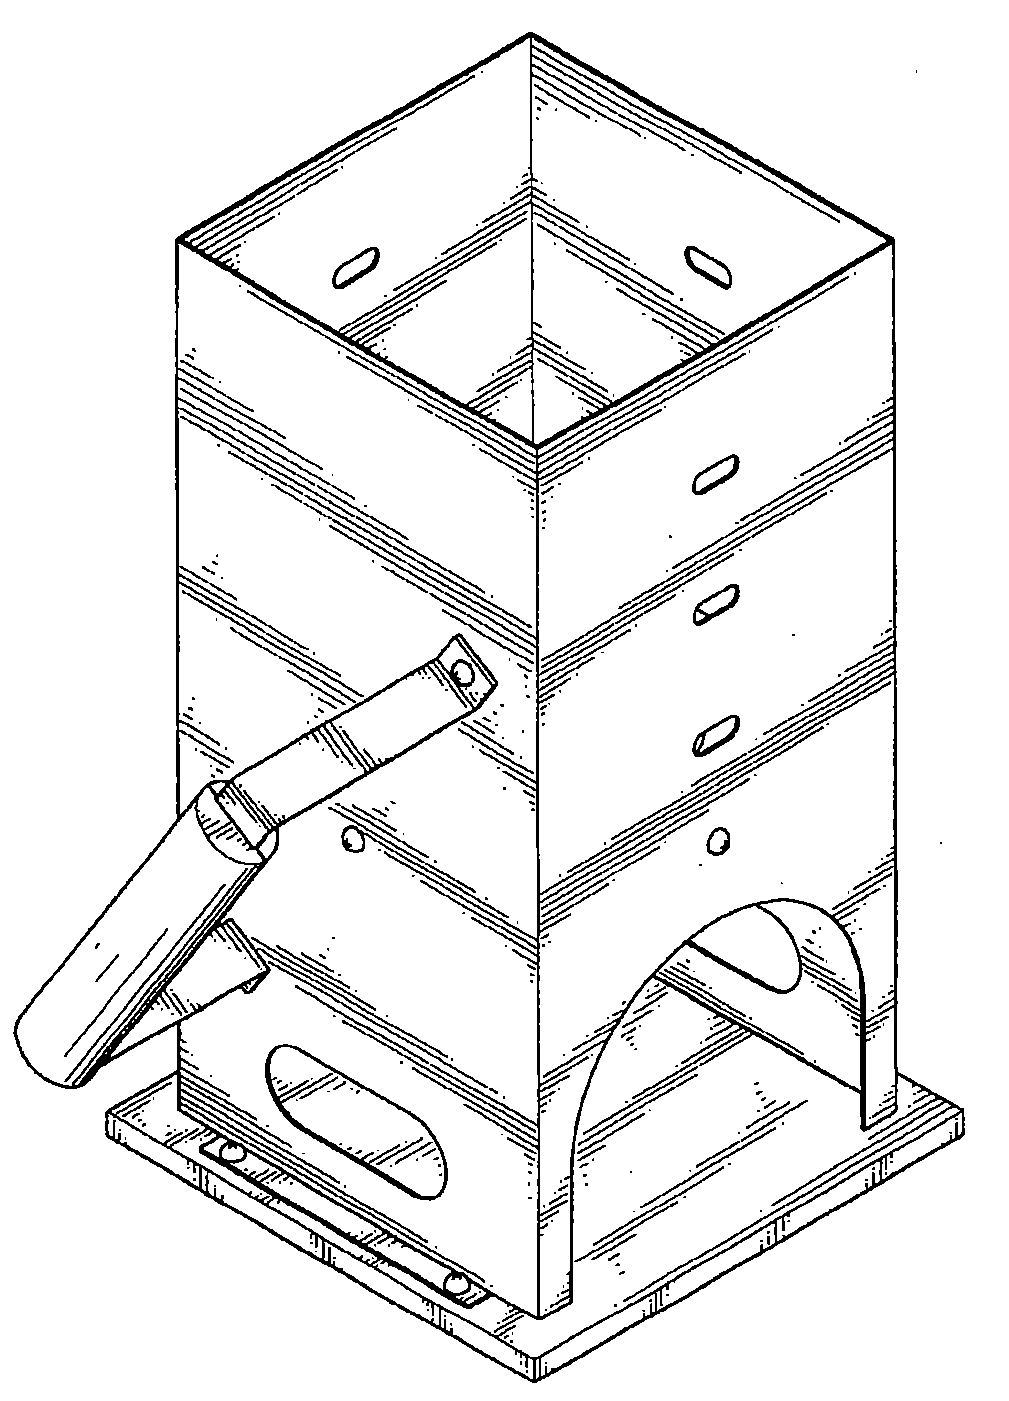 Example of a design for charcoal type container.
